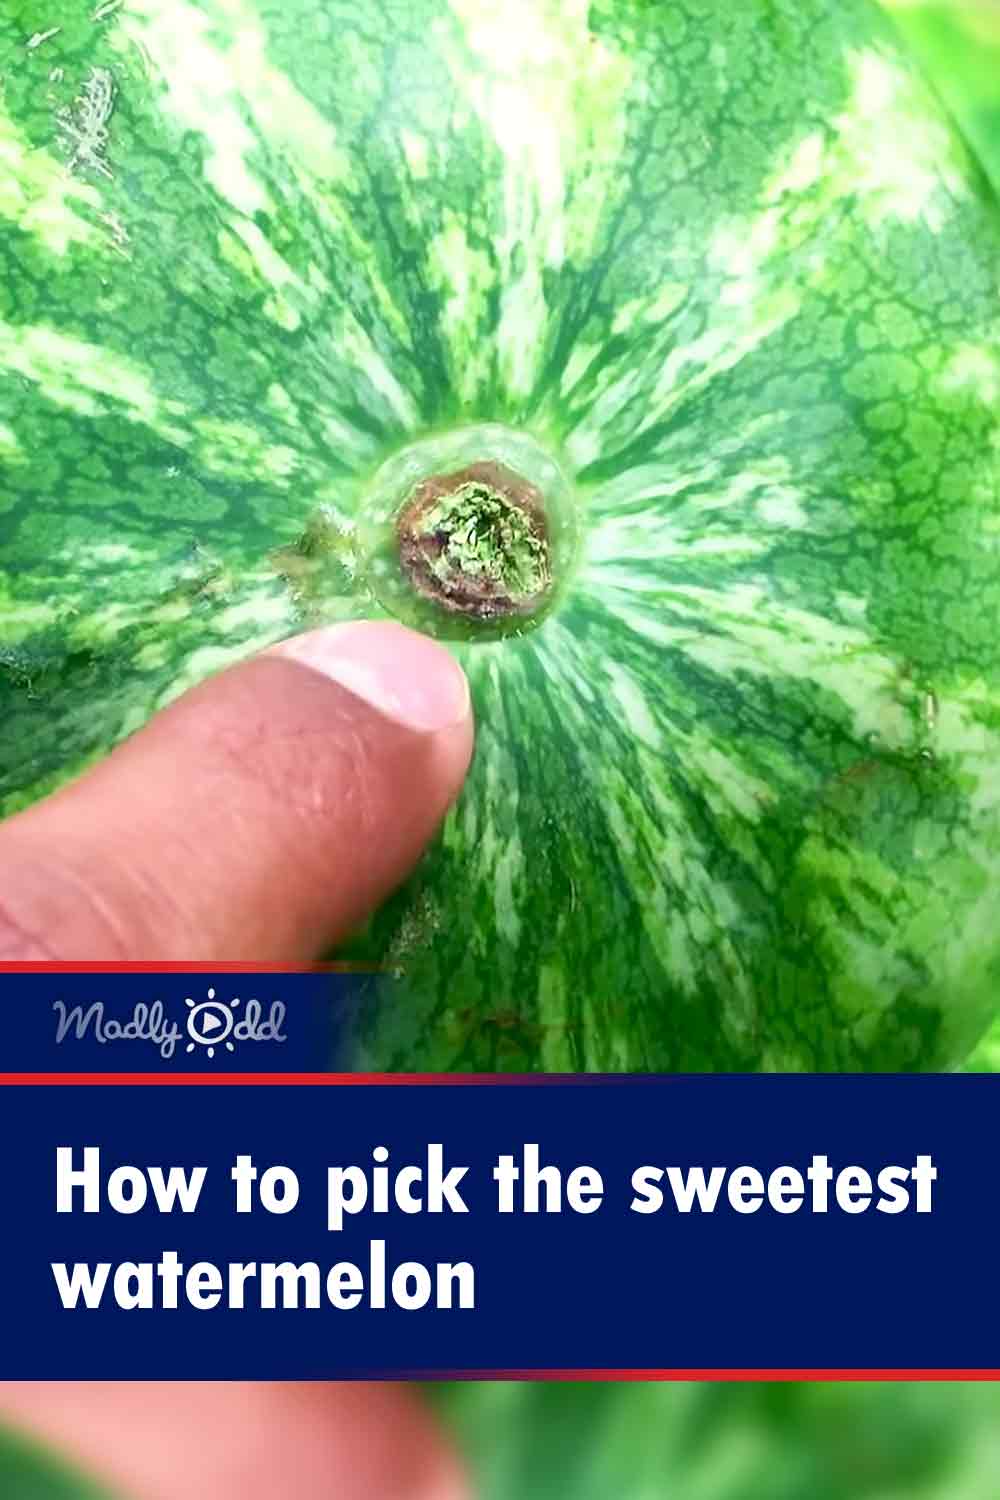 How to pick the sweetest watermelon